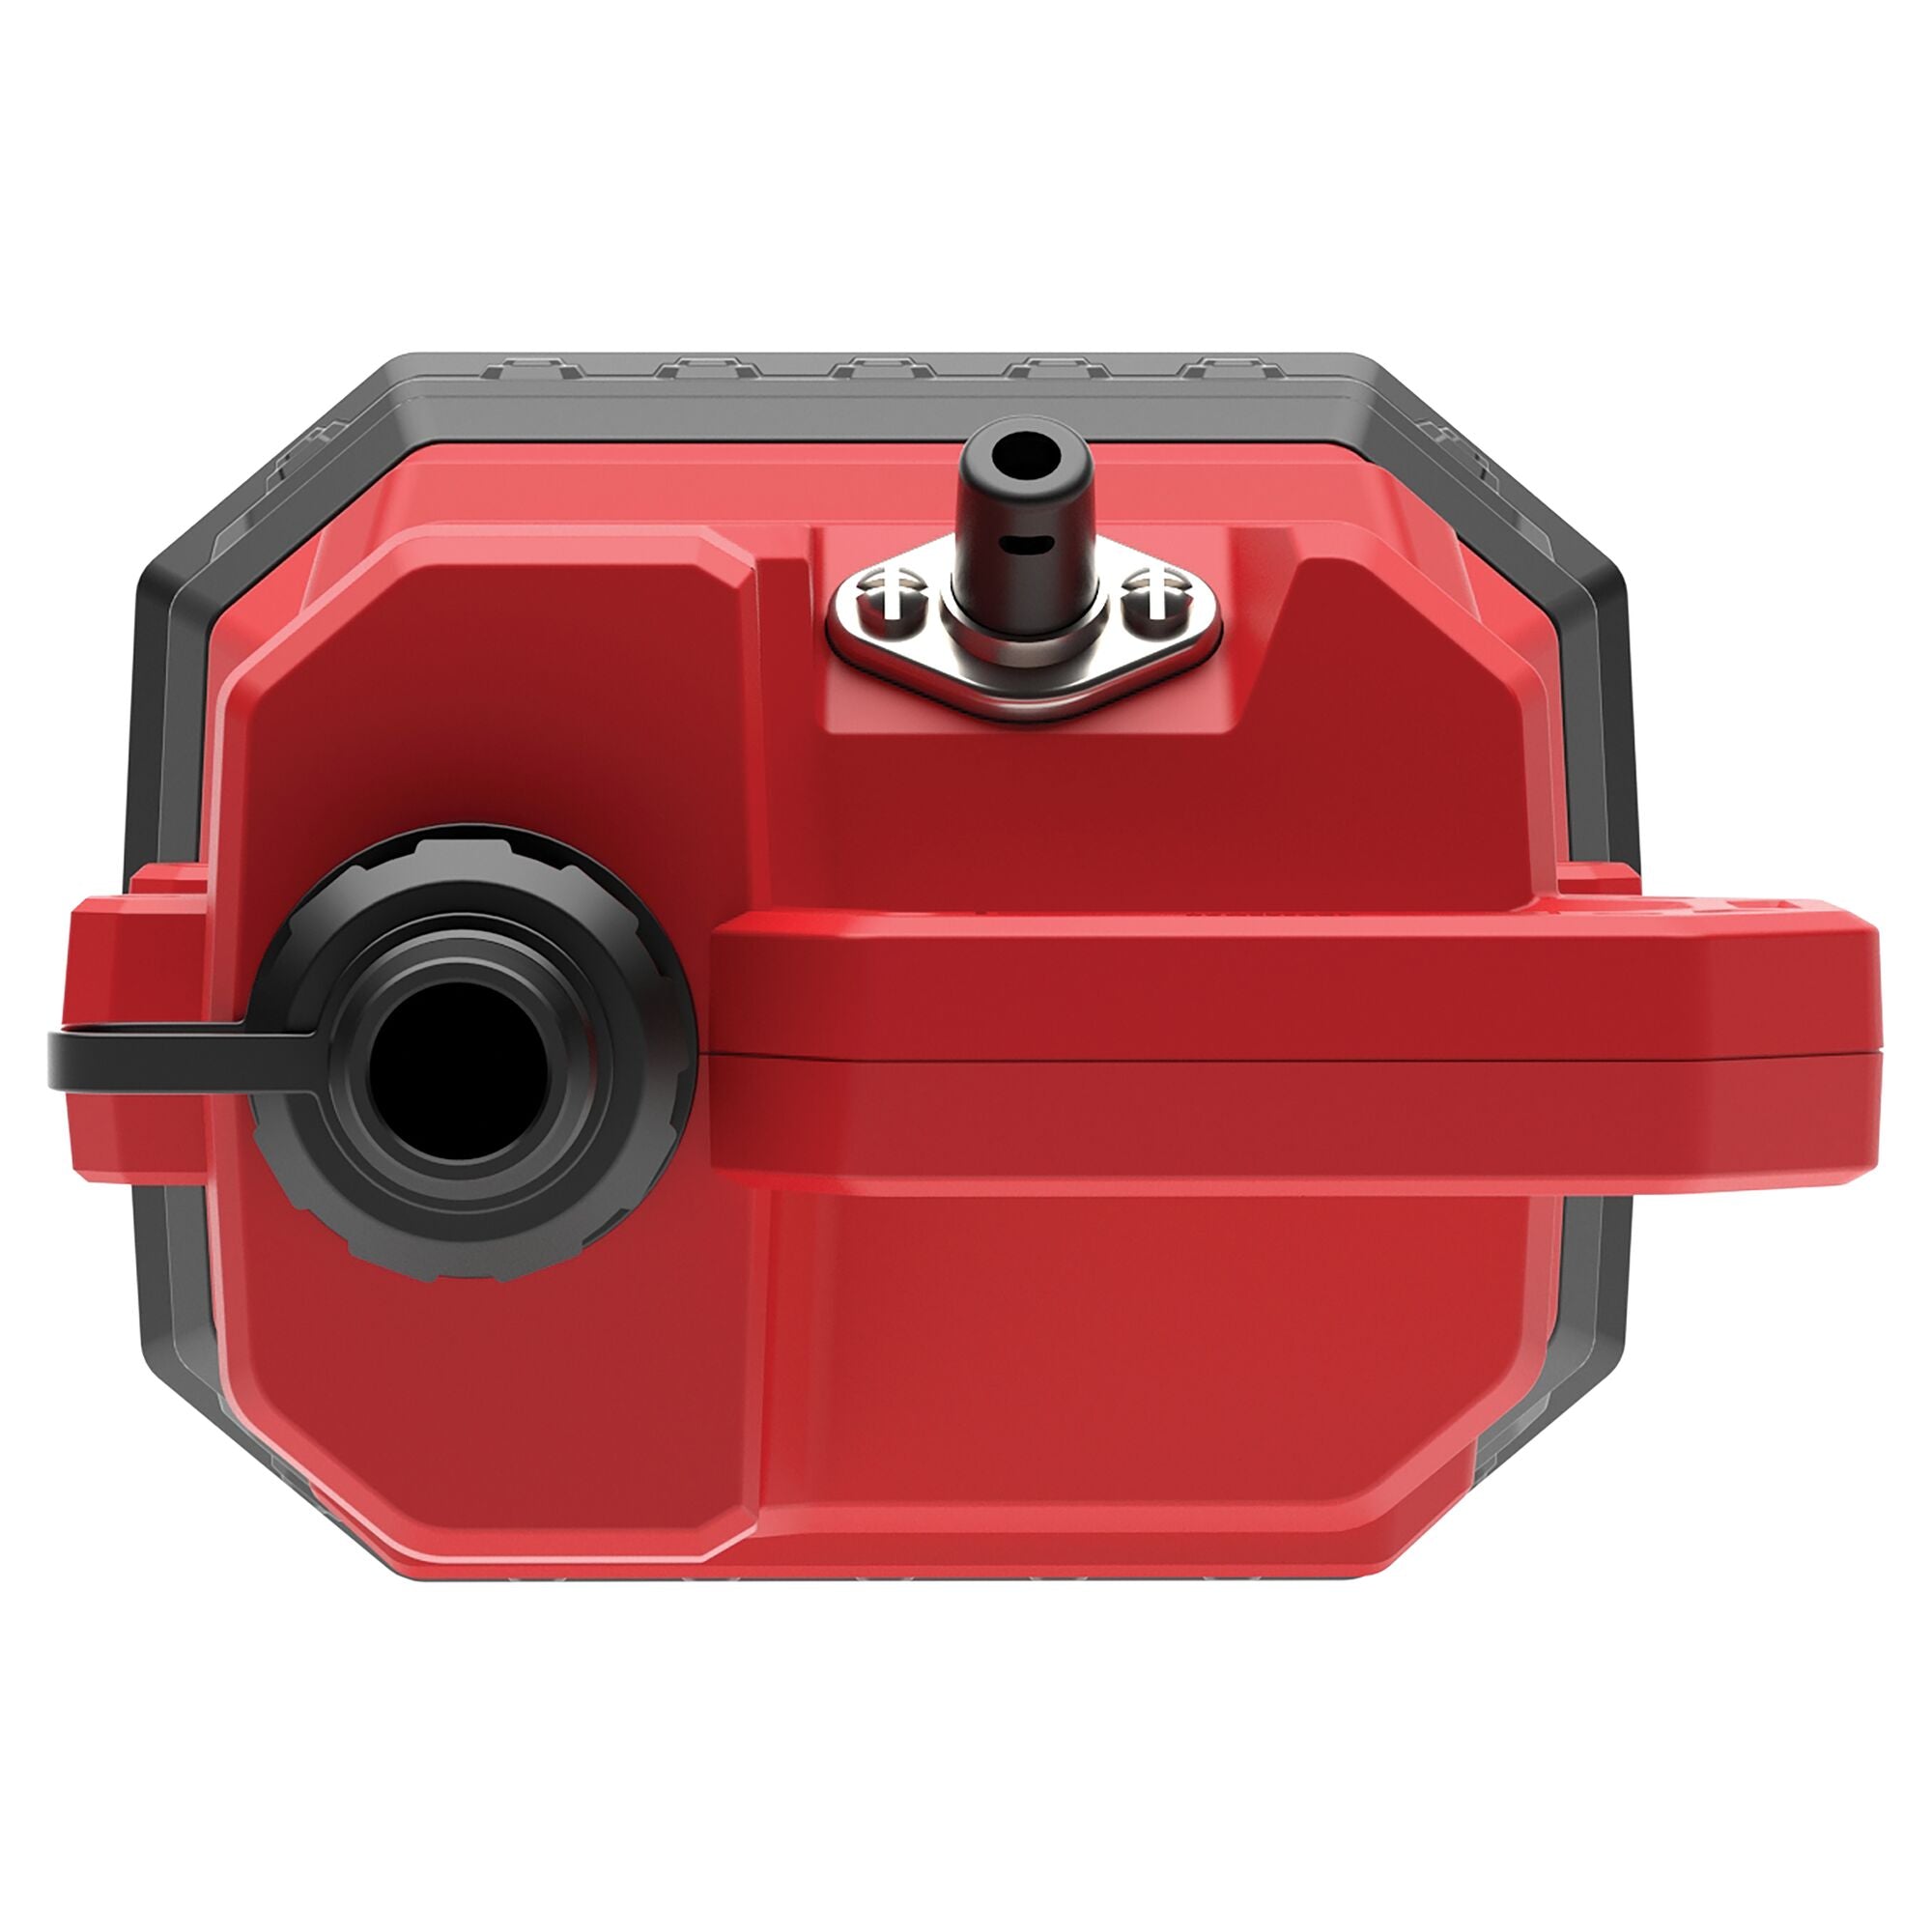 1-2HP WATER/UTILITY PUMP REINFORCED THERMOPLASTIC SUBMERSIBLE WITH GARDEN HOSE ADAPTER TOP VIEW